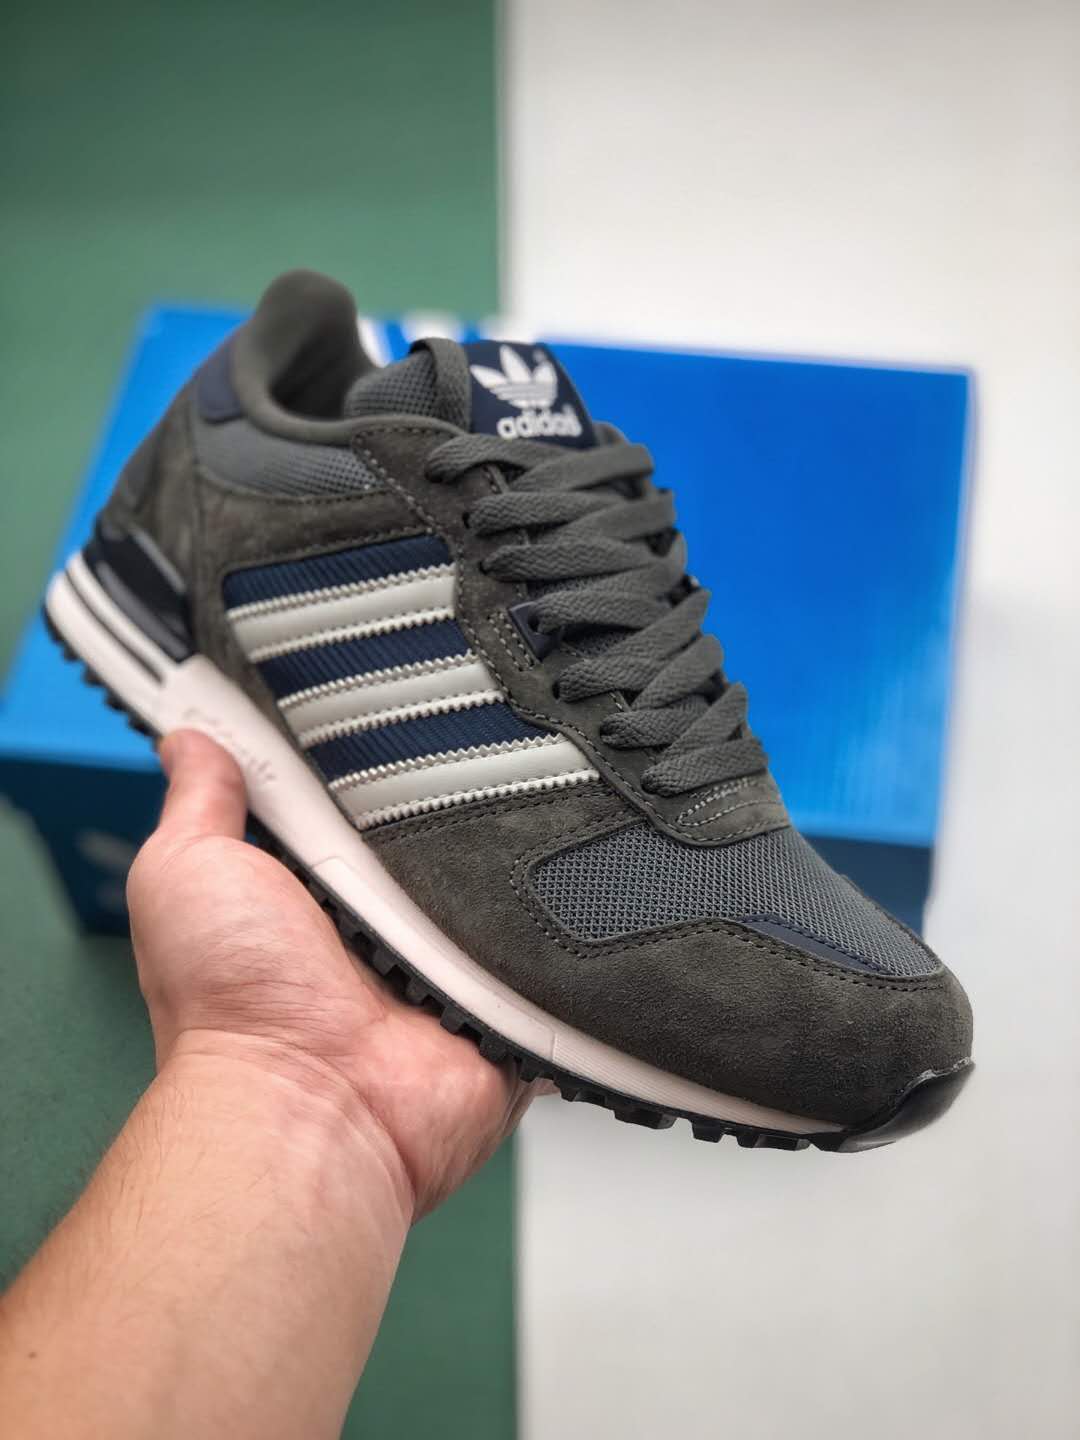 Adidas ZX 700 M19391 - Shop the Latest Collection Now!